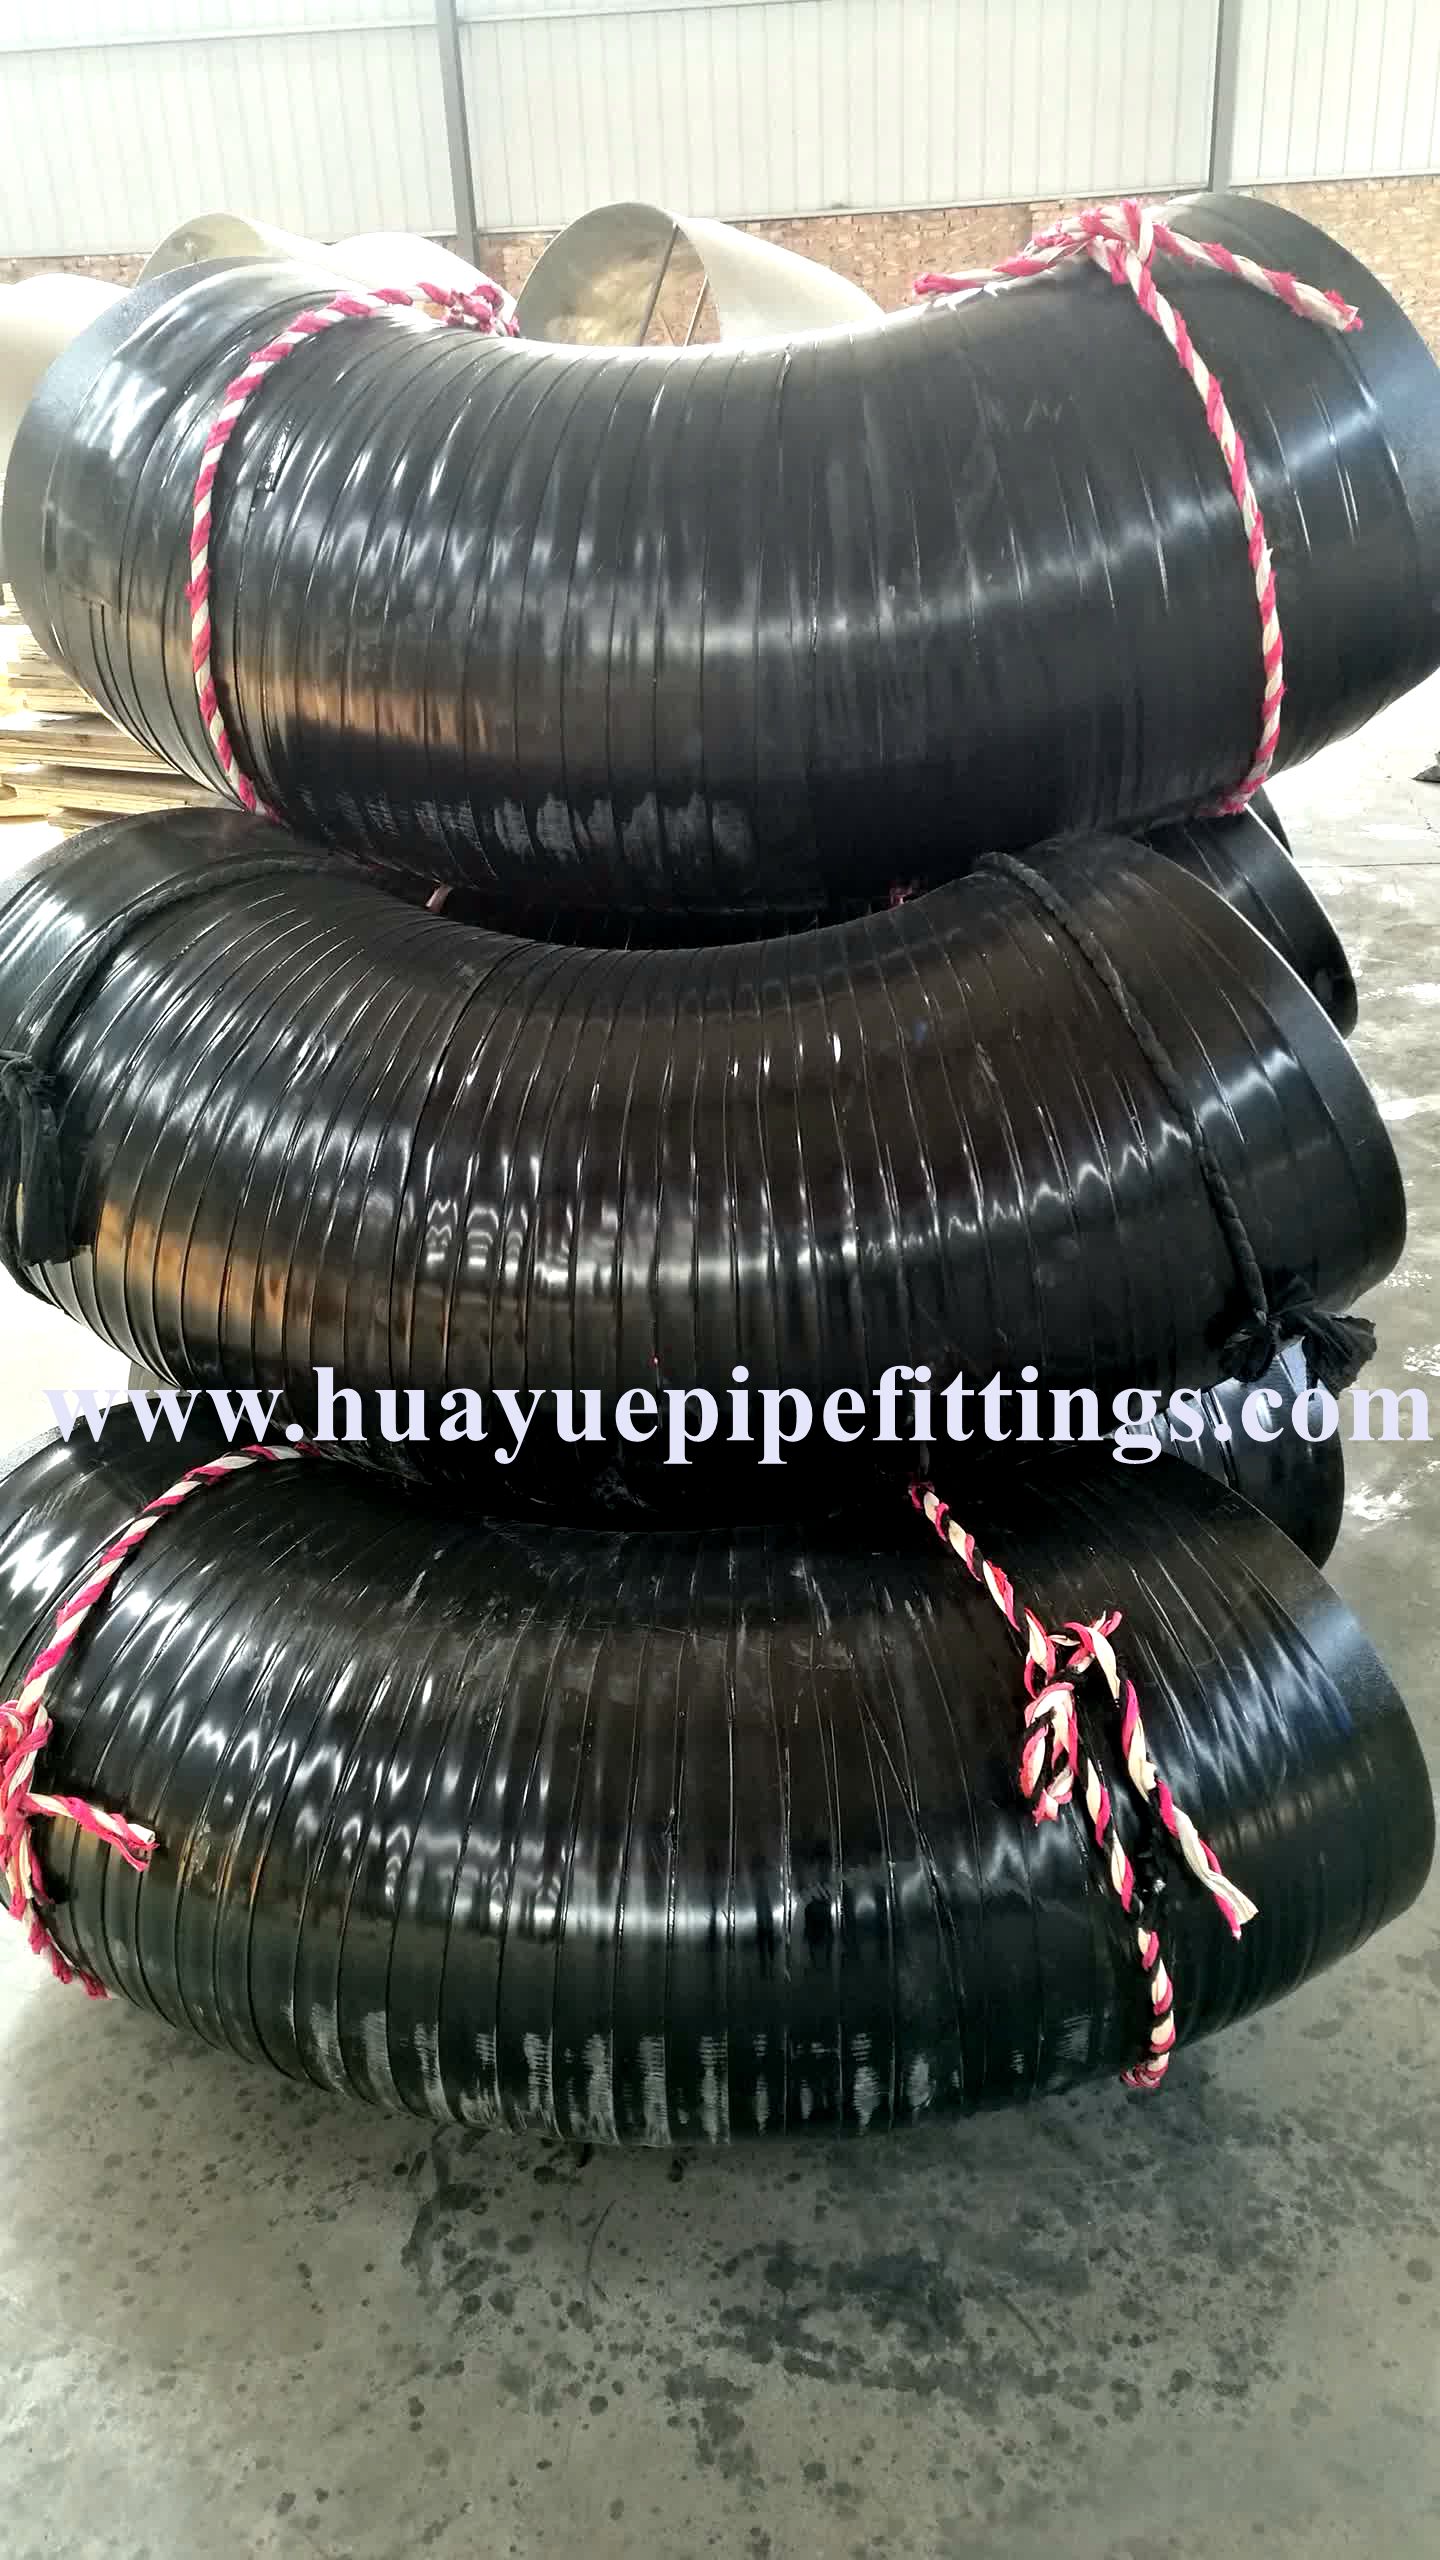 3PE COATING 20'' STD 1.5D ASTM A234 WPB PIPE ELBOW